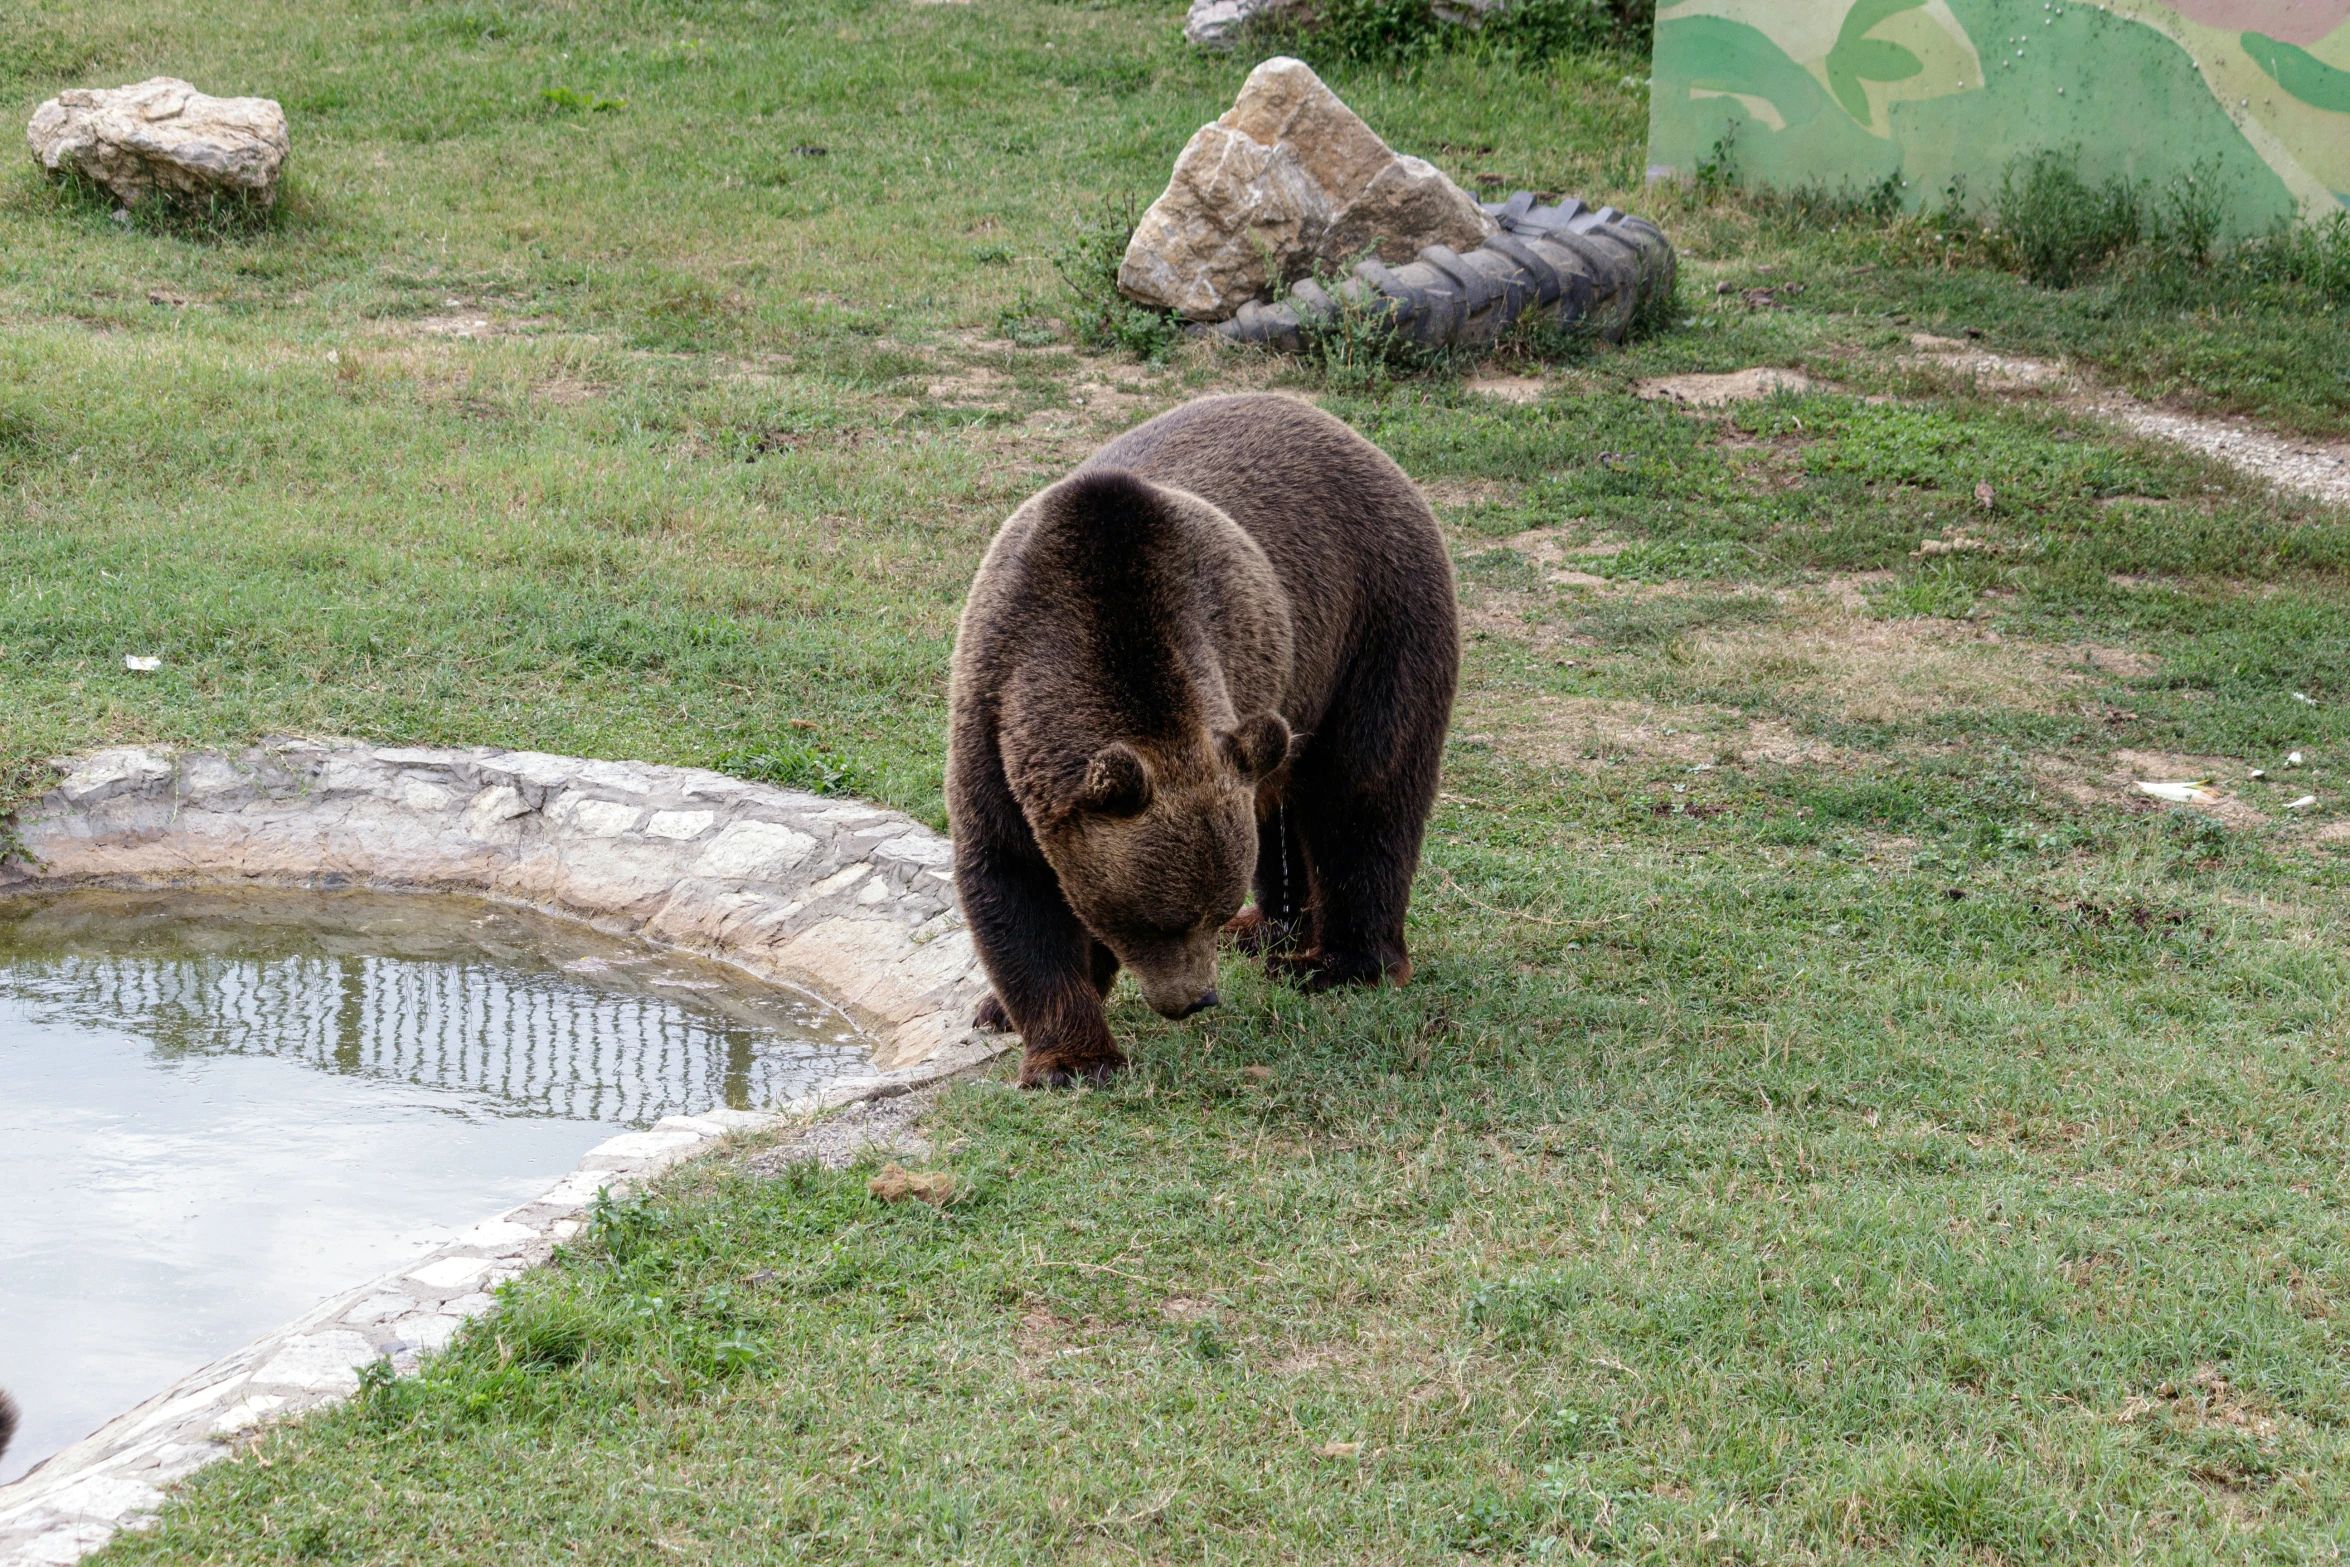 a bear stands by an dle in the grass